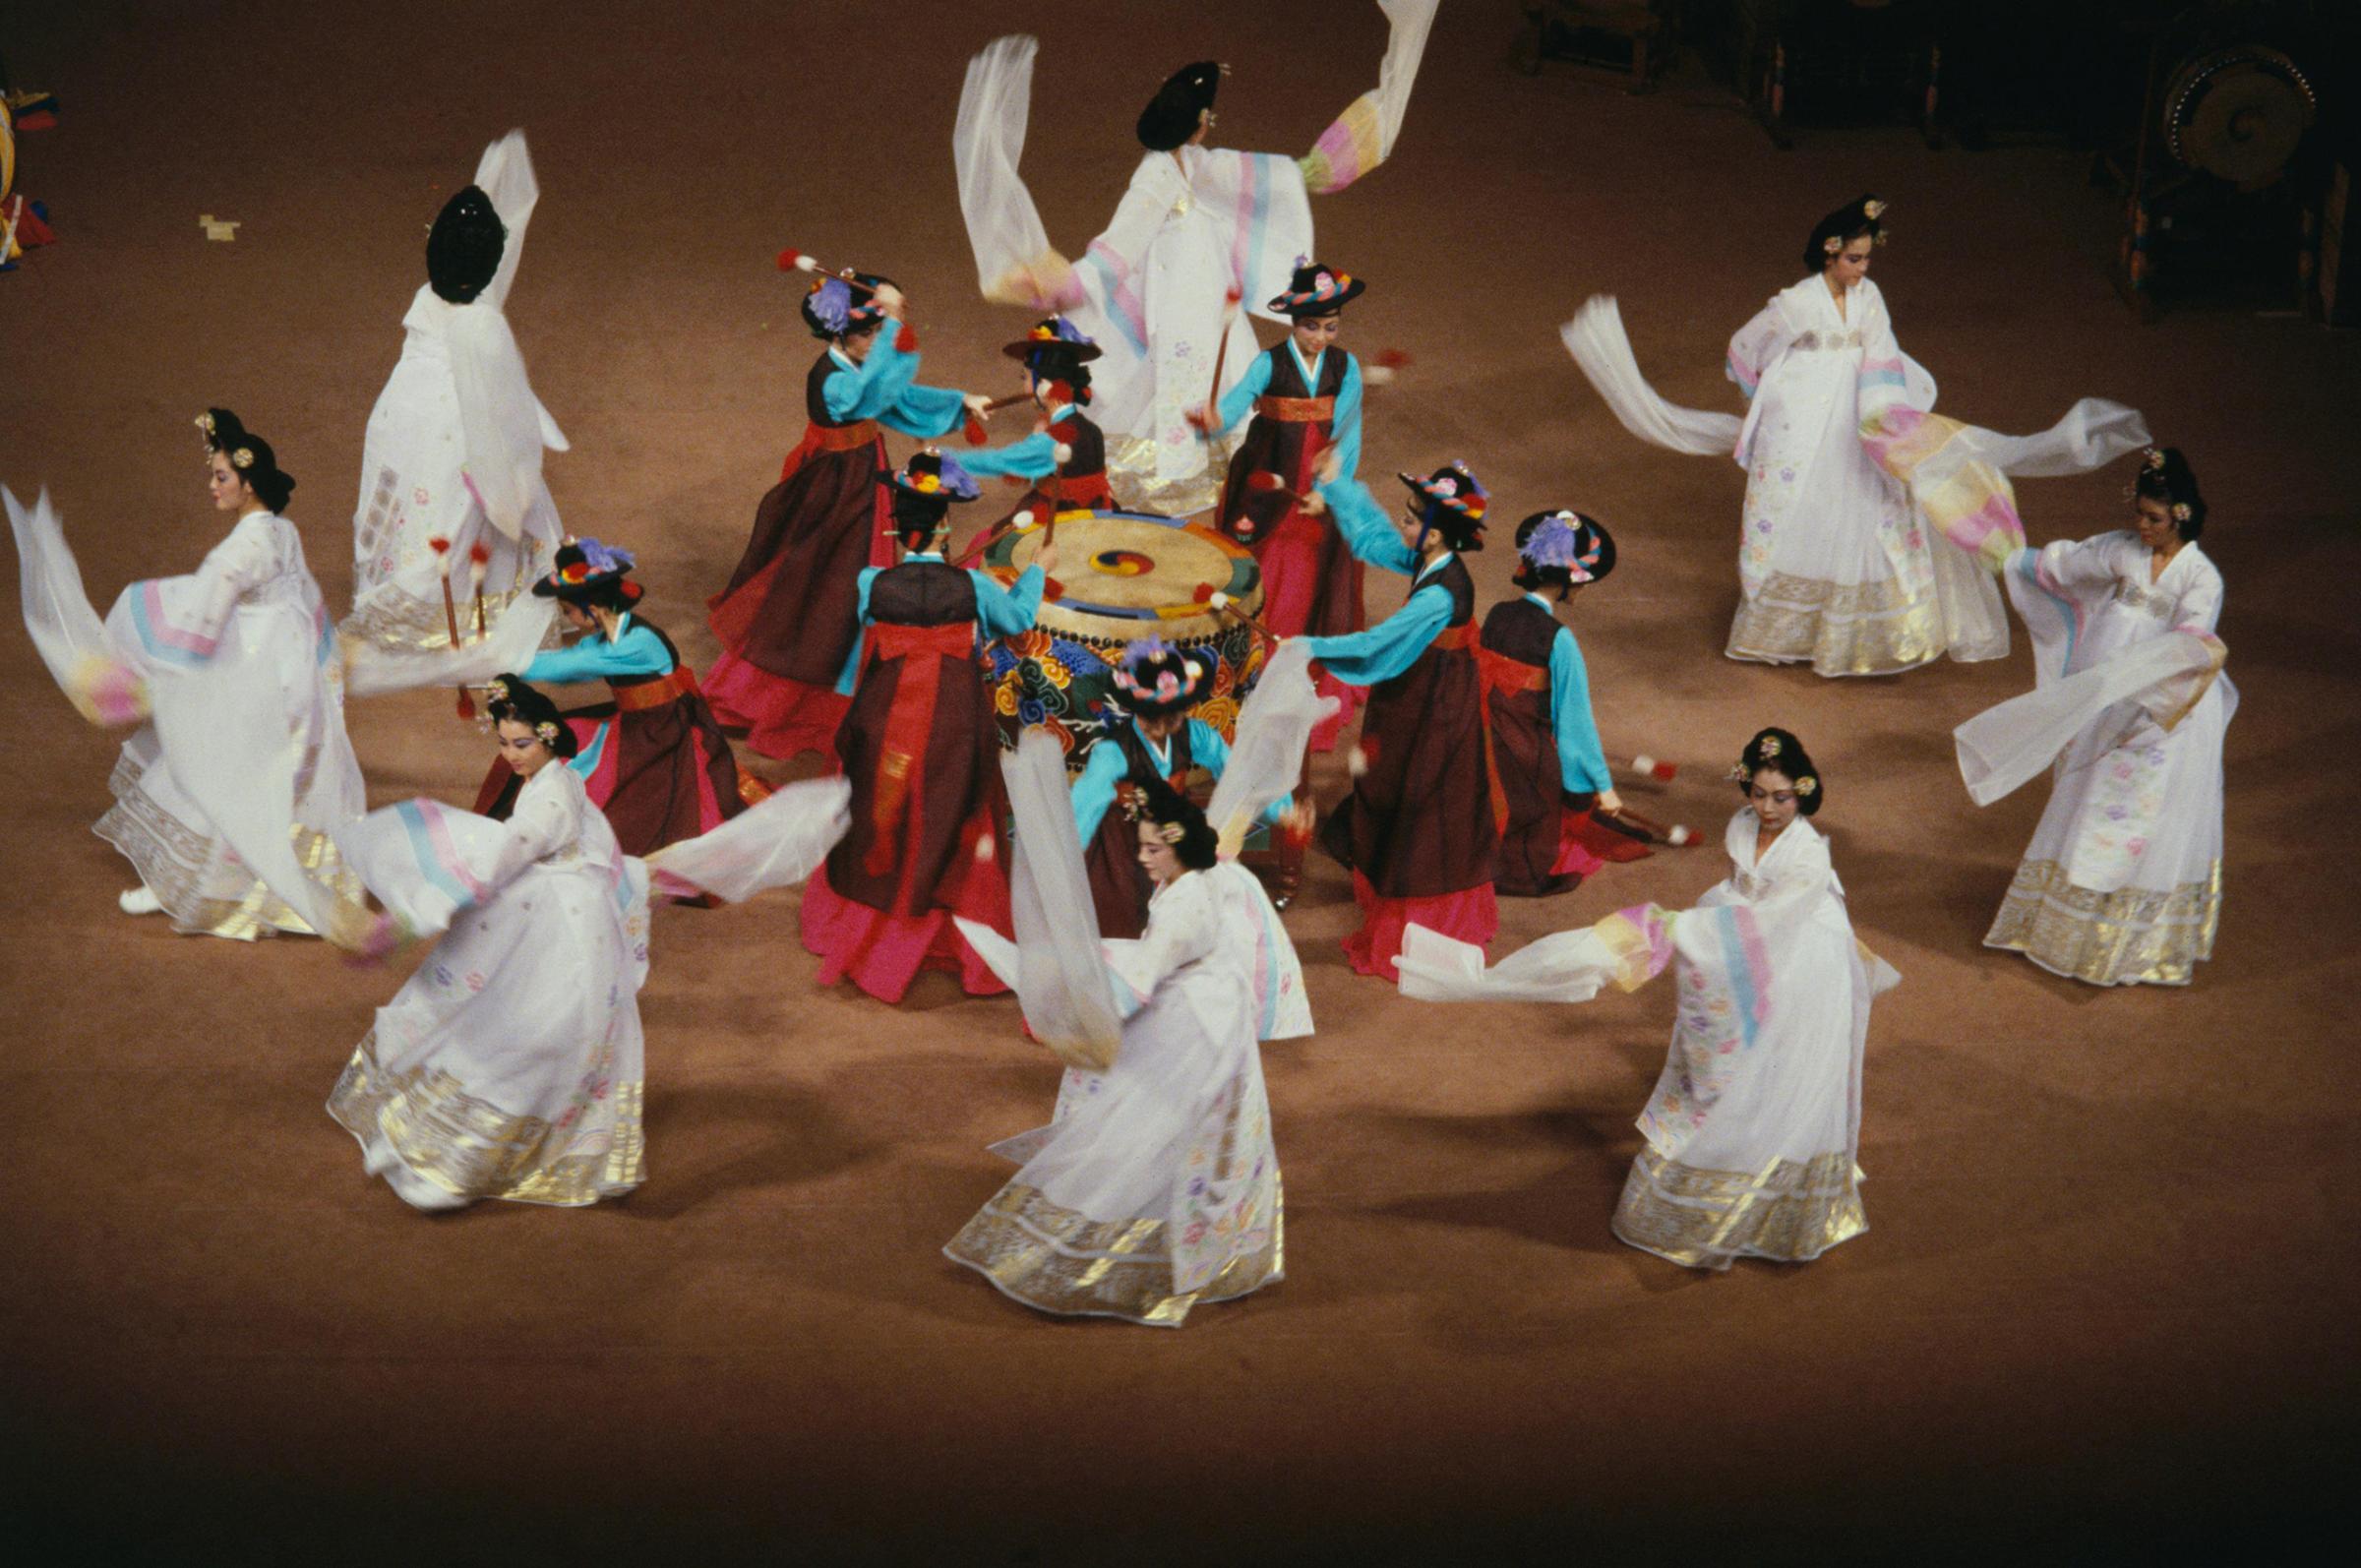 94th IOC Session, Seoul, 1988 - Opening ceremony, a dance.